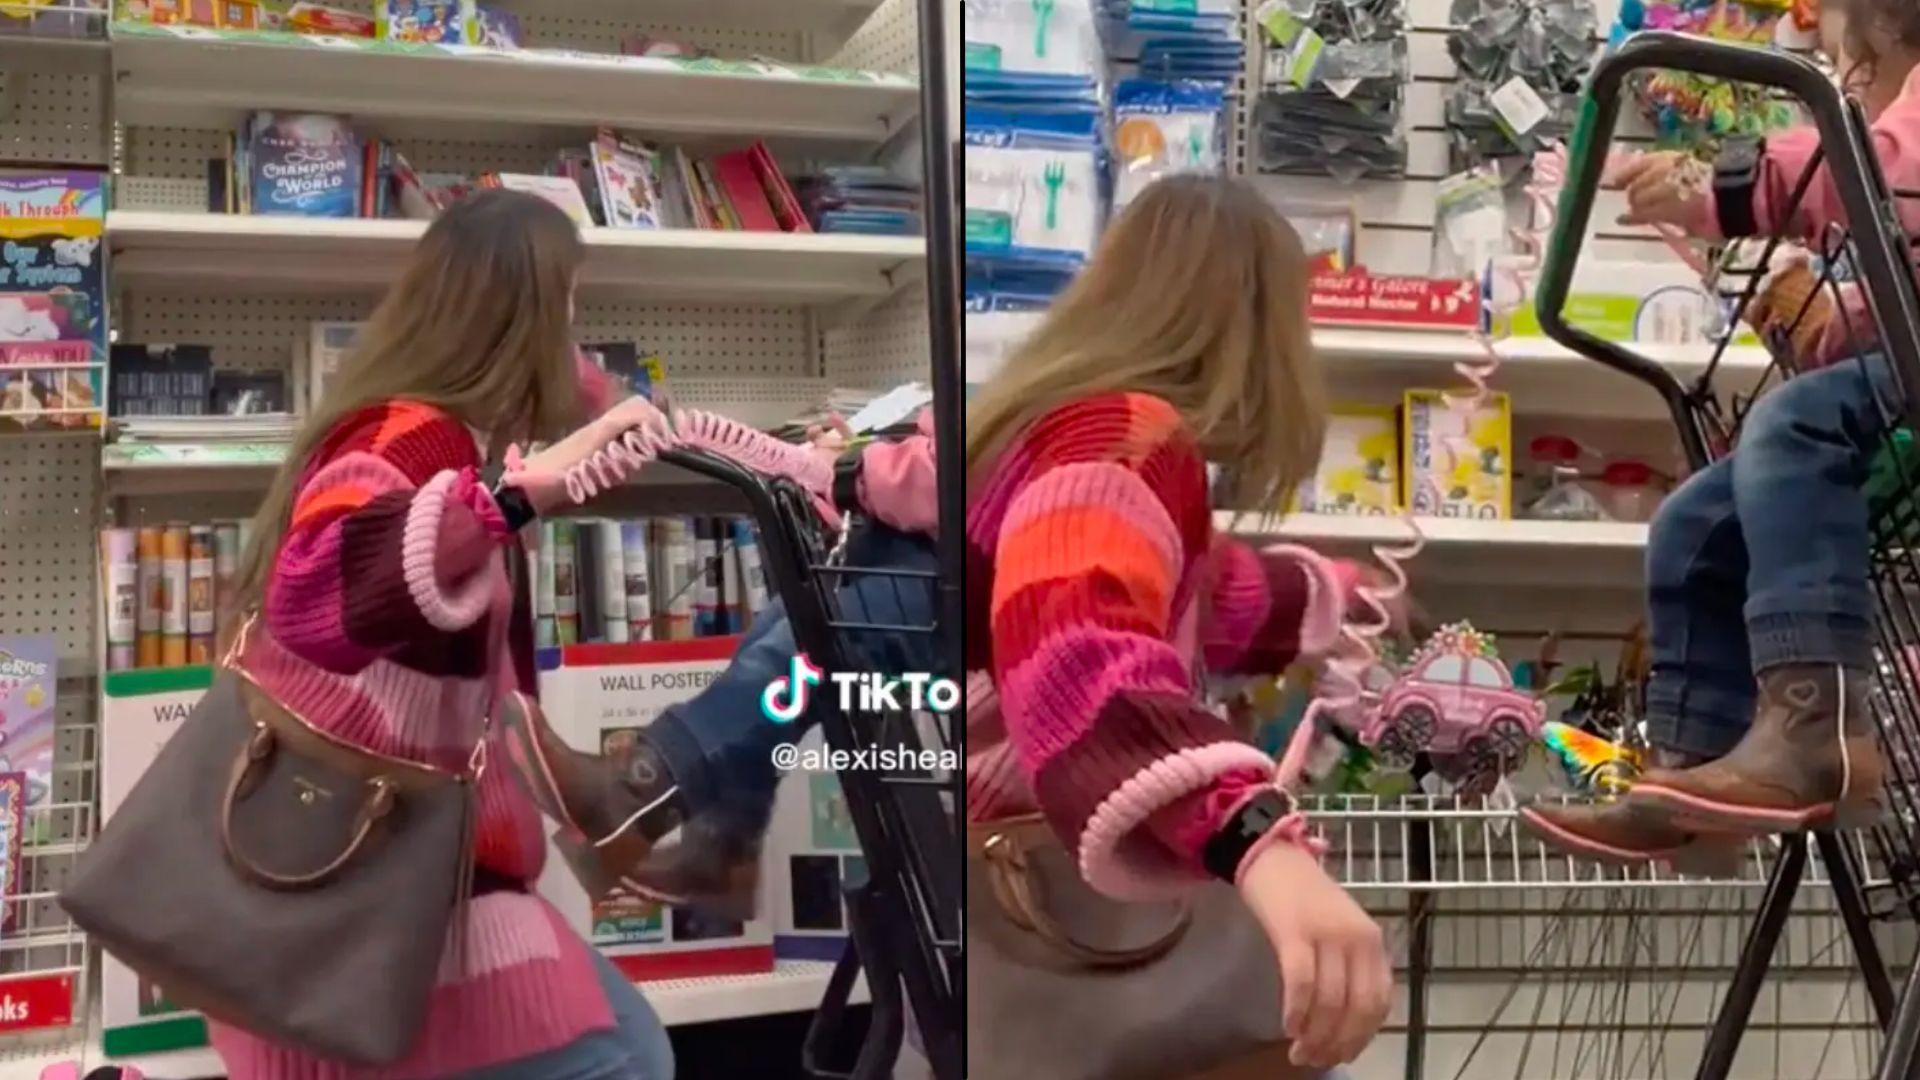 Mom holding onto daughter in shopping cart with pink leash